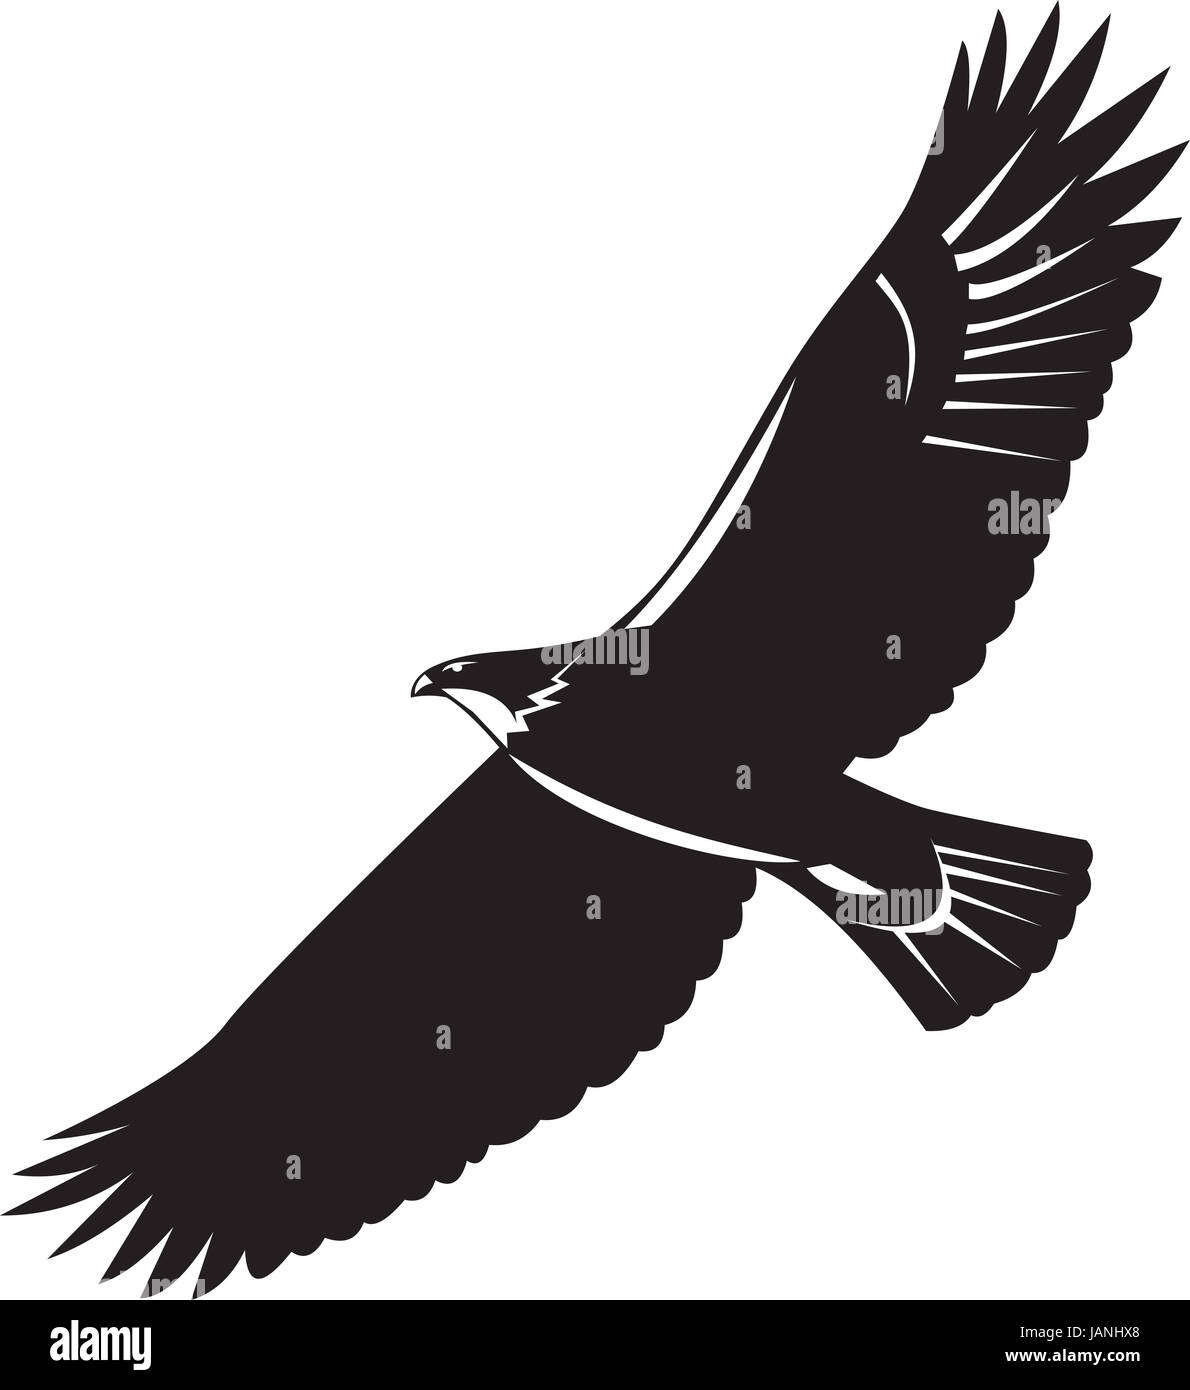 Illustration of a bald eagle flying soaring on isolated background done in retro woodcut style. Stock Photo